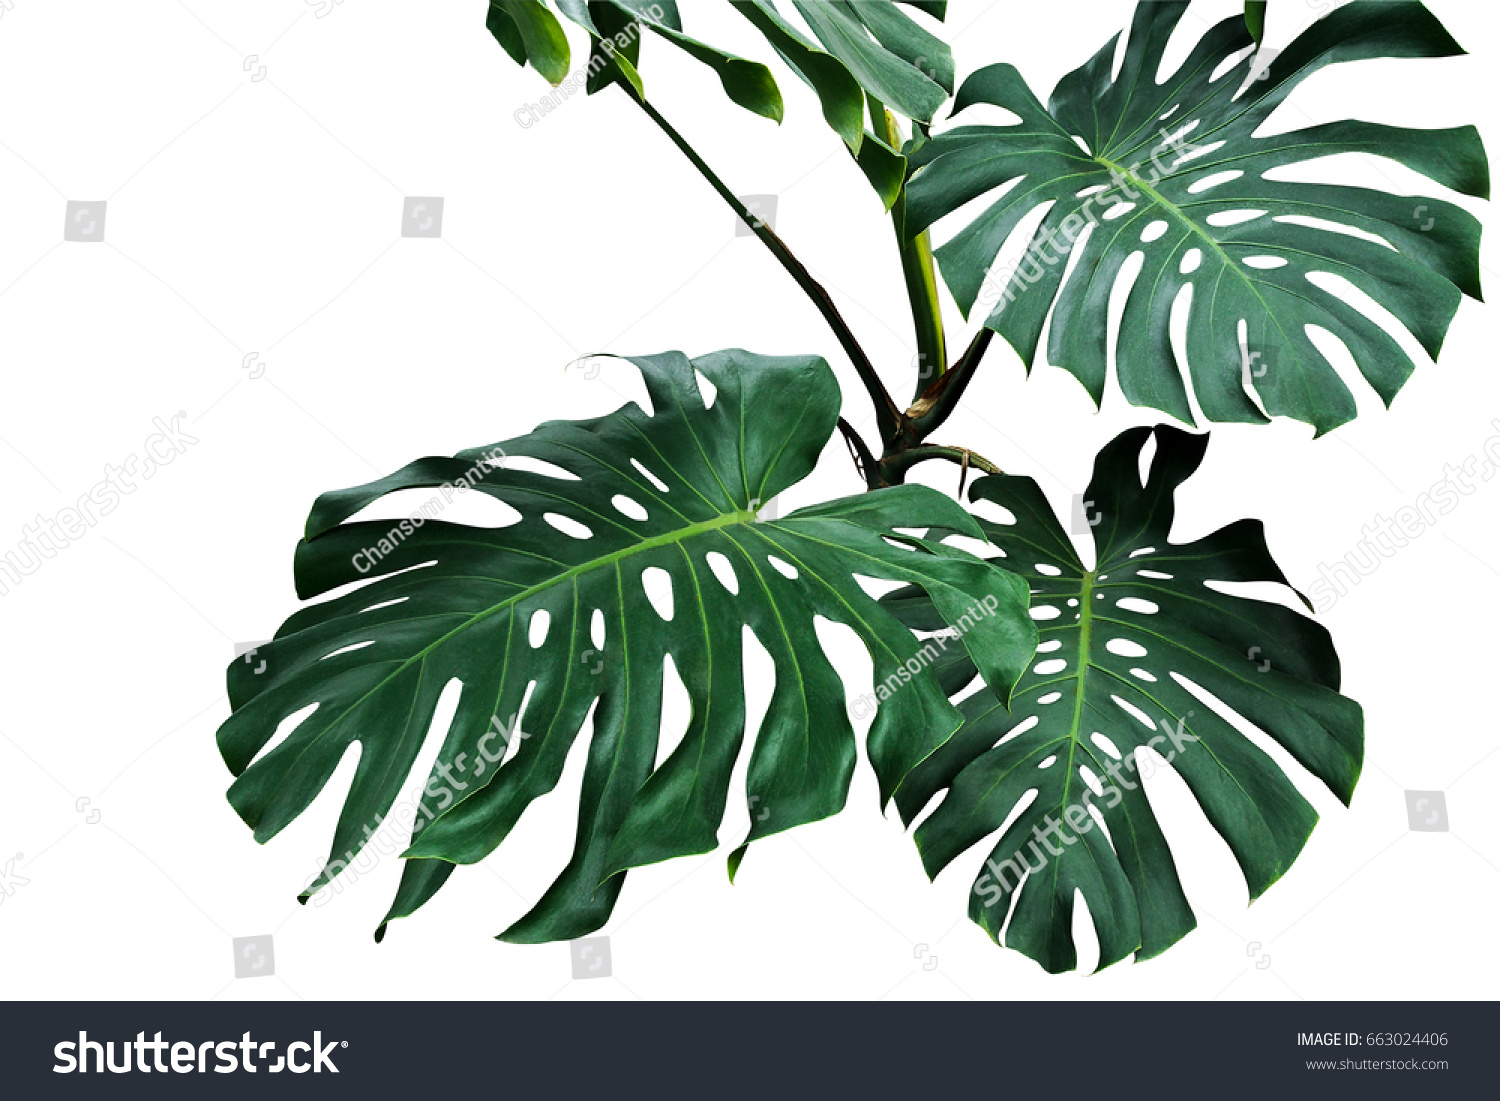 Dark green leaves of monstera or split-leaf philodendron (Monstera deliciosa) the tropical foliage plant growing in wild isolated on white background, clipping path included. #663024406